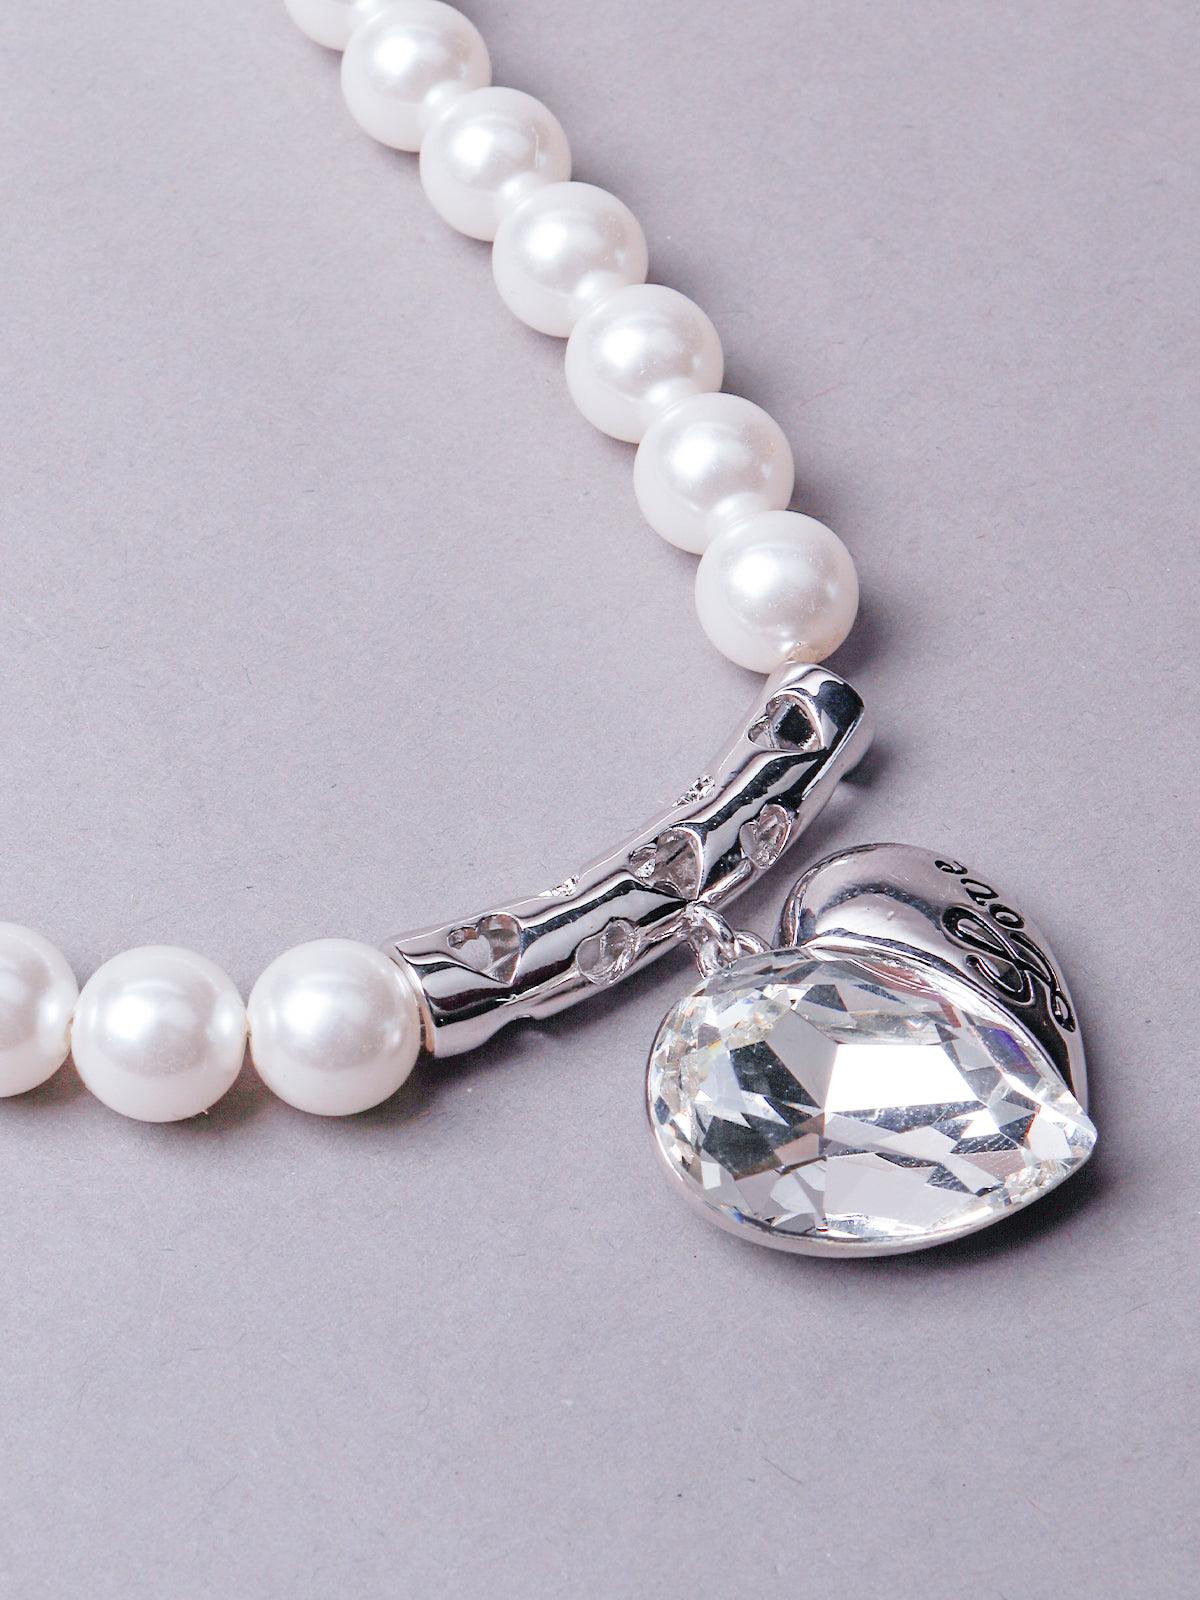 Women's Exquisite Pearl Necklace With A Heart Shape Pendant - Odette